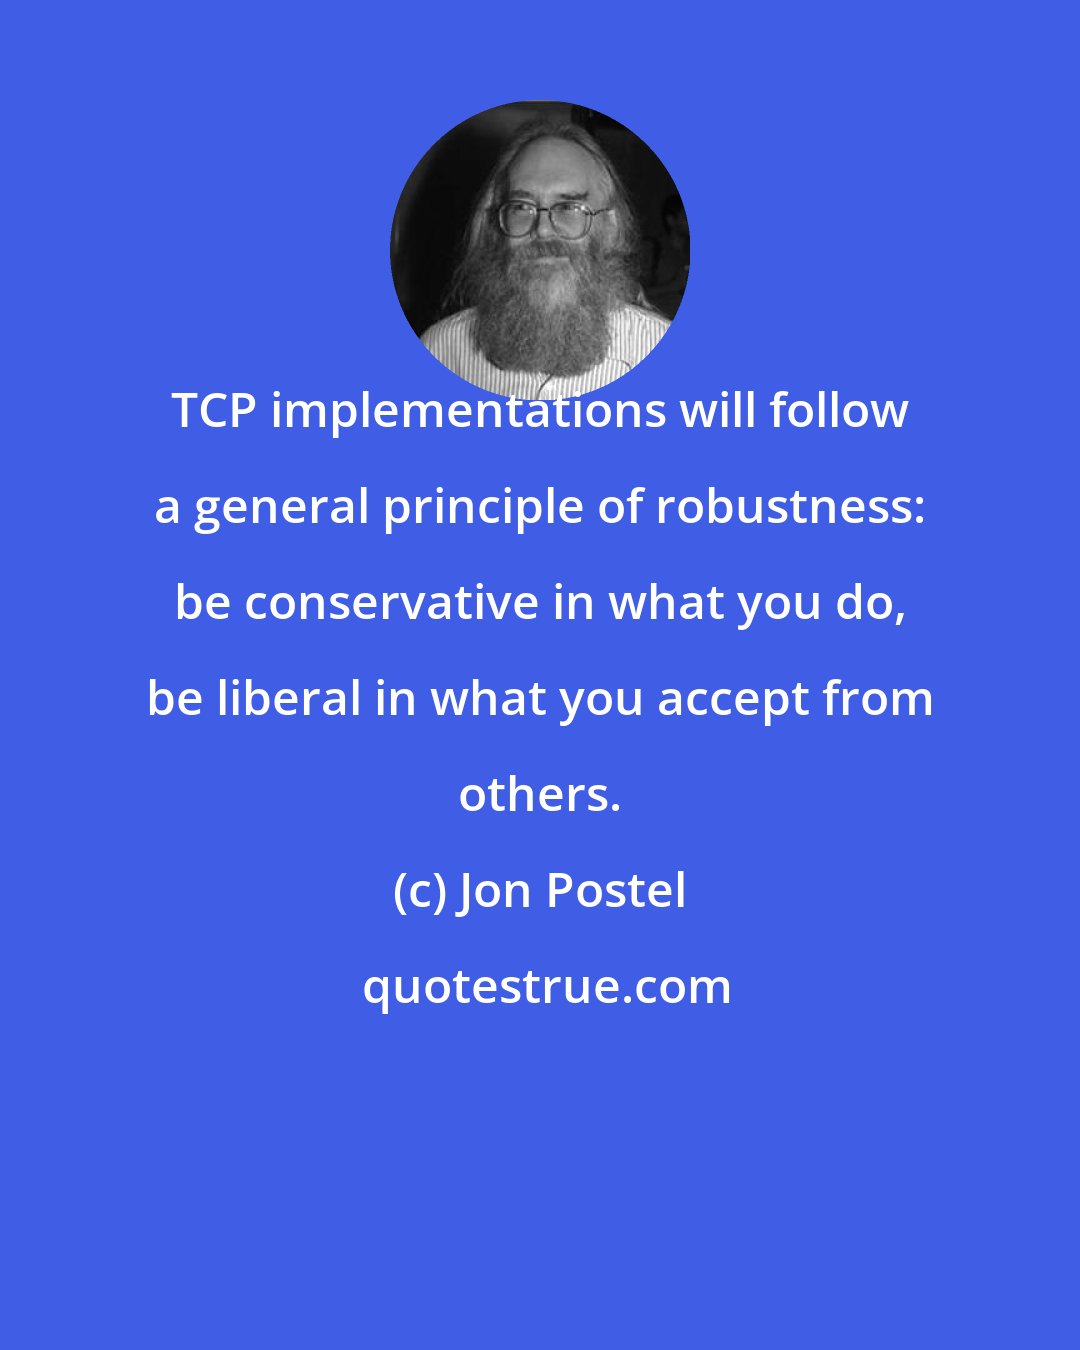 Jon Postel: TCP implementations will follow a general principle of robustness: be conservative in what you do, be liberal in what you accept from others.